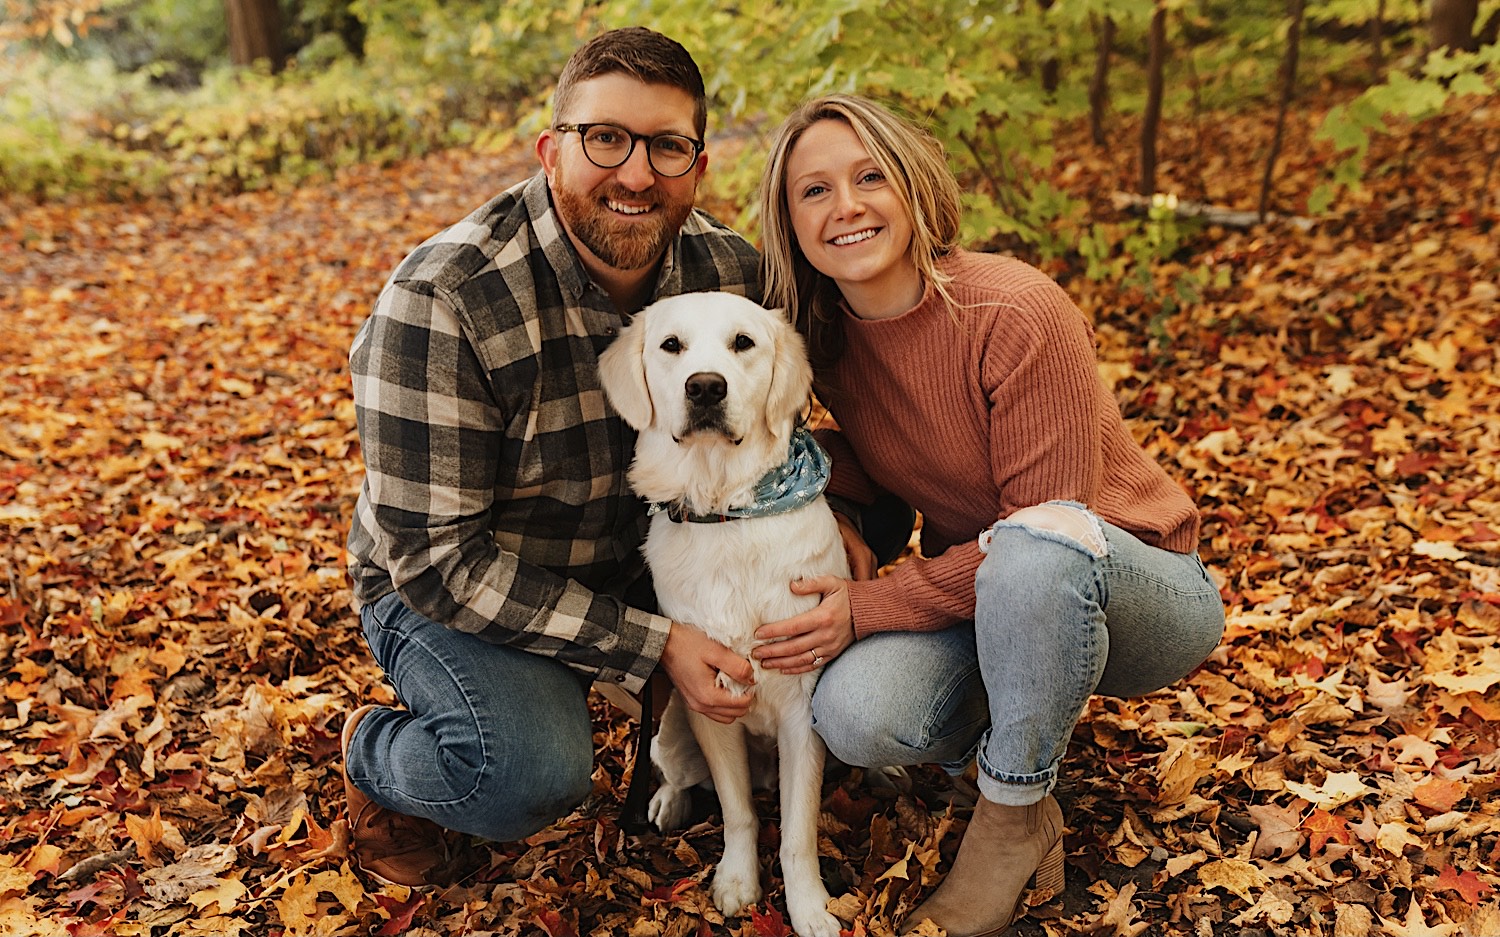 During their fall engagement session in Winona a couple squat down next to their dog who is sitting in between them, the three of them look at the camera and the man and woman smile, the ground around them is covered in leaves